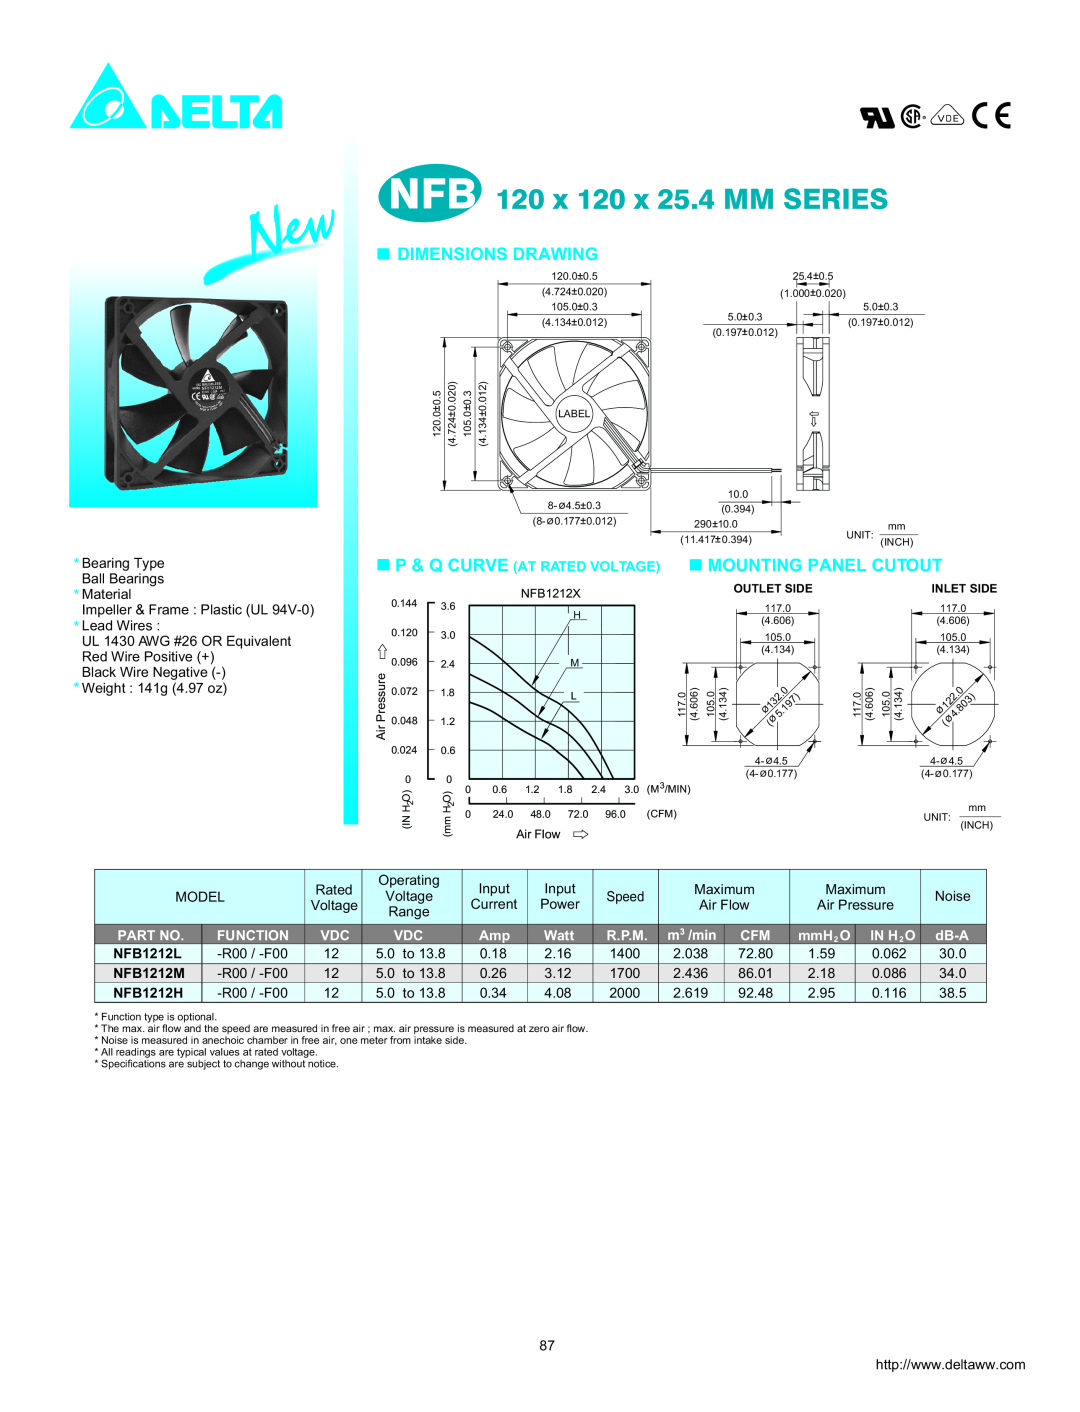 Delta Electronics NFB1212H dimensions NFB 120 x 120 x 25.4 MM SERIES, Dimensions Drawing, Mounting Panel Cutout, Function 